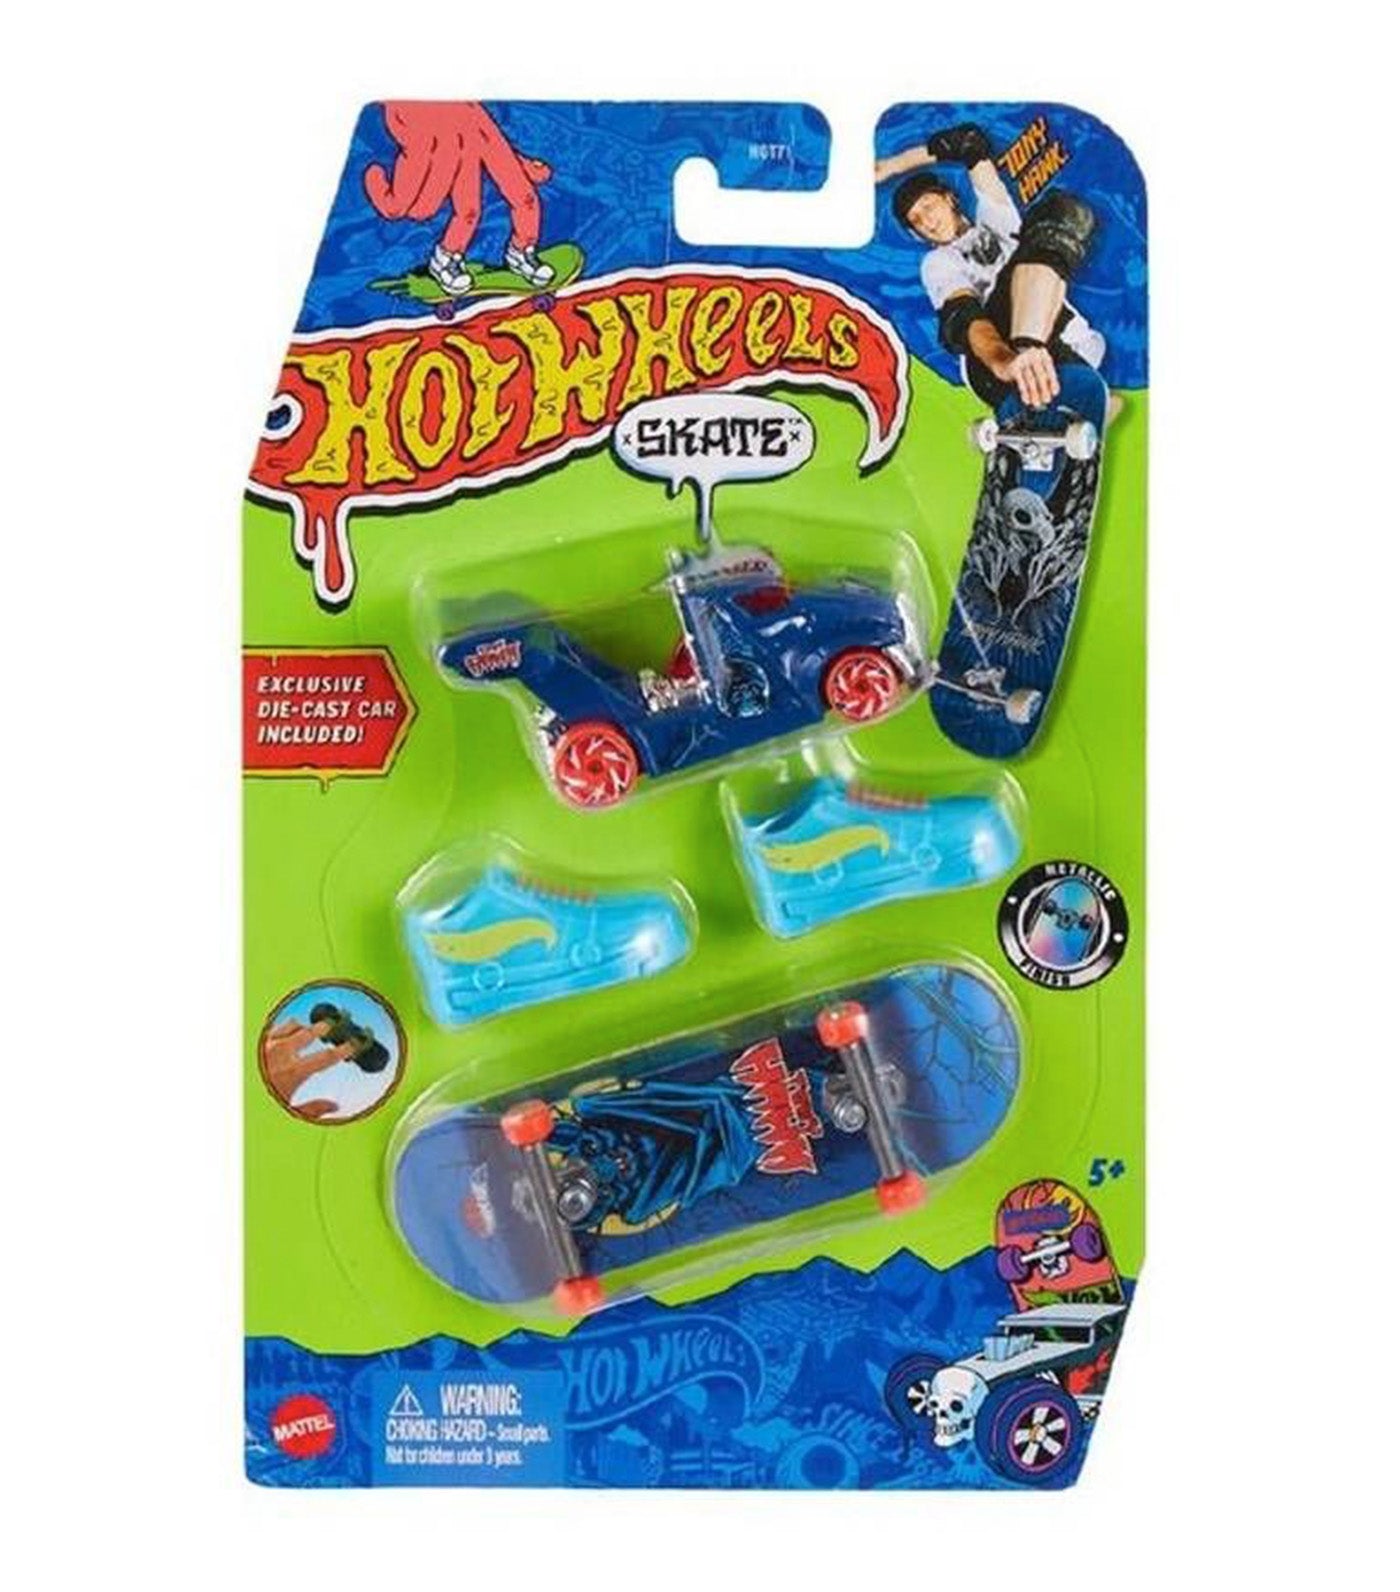 Tony Hawk partners with Hot Wheels for new finger skateboard toy